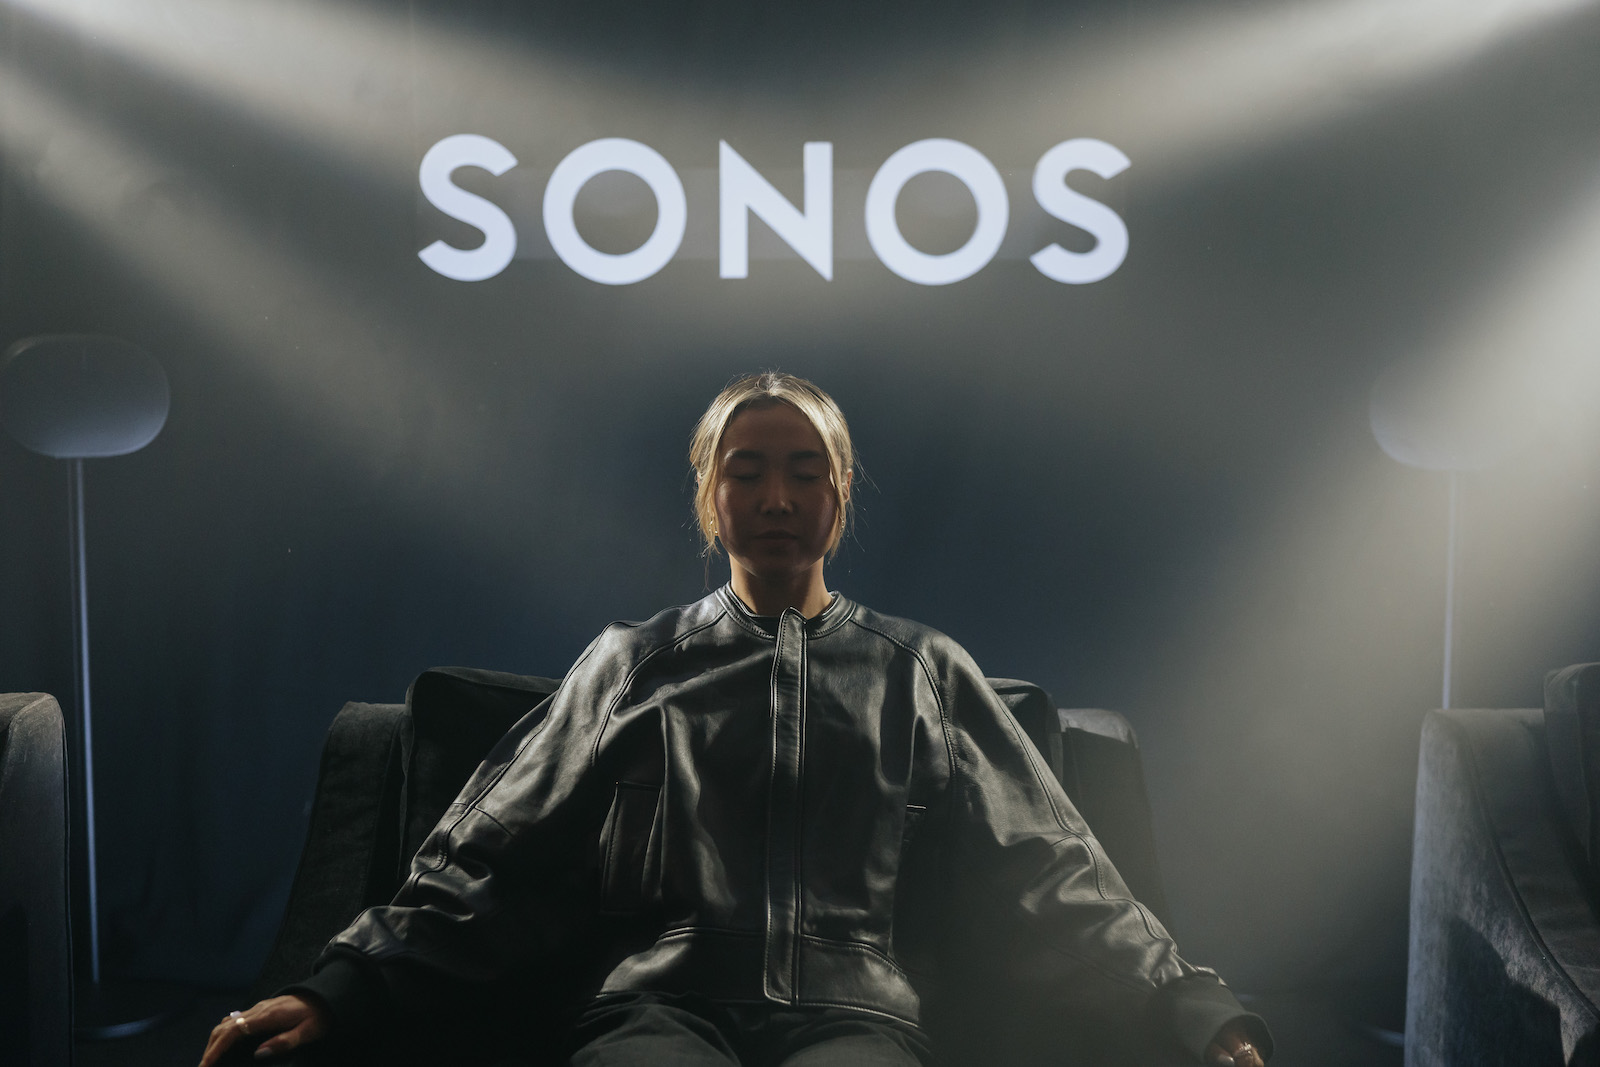 Sonos teams up with producer Eric J Dubowsky for global launch of ‘Frisson Trigger’ via Amplify